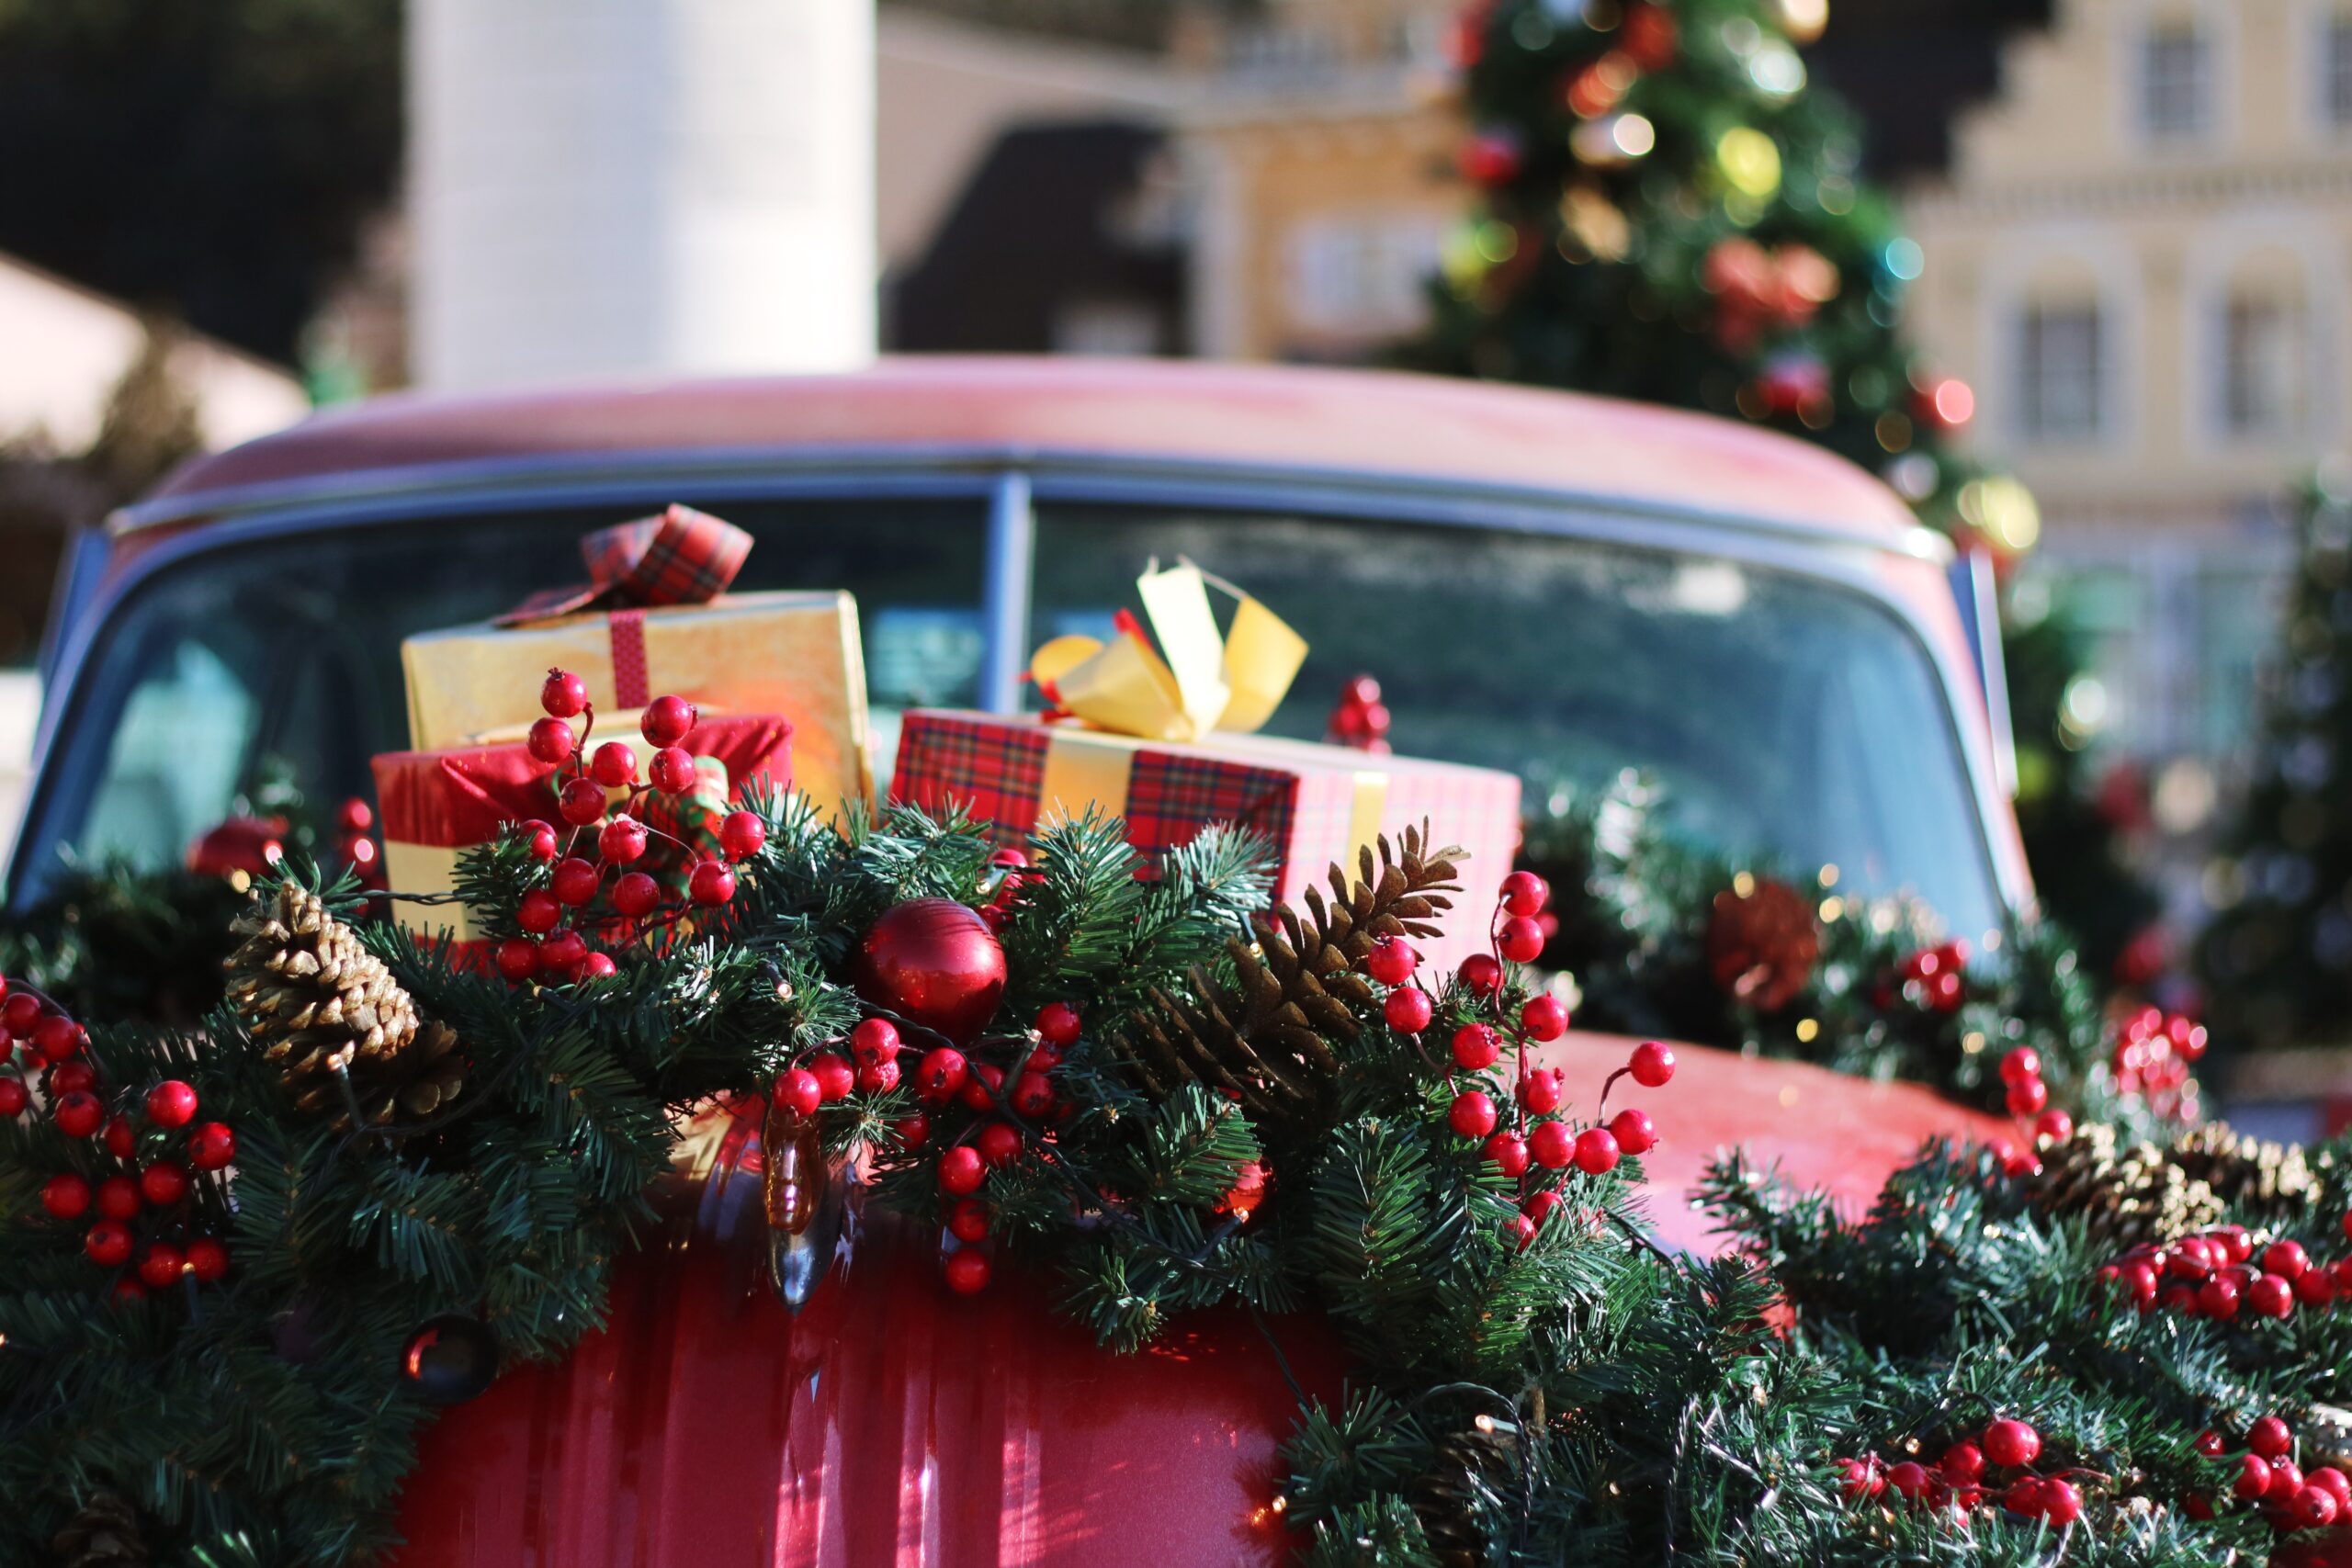 North Carolina is a popular state to visit for Christmas. 
pictured: a red car in North Carolina streets covered in pine and Christmas presents with a decorated tree in the background 